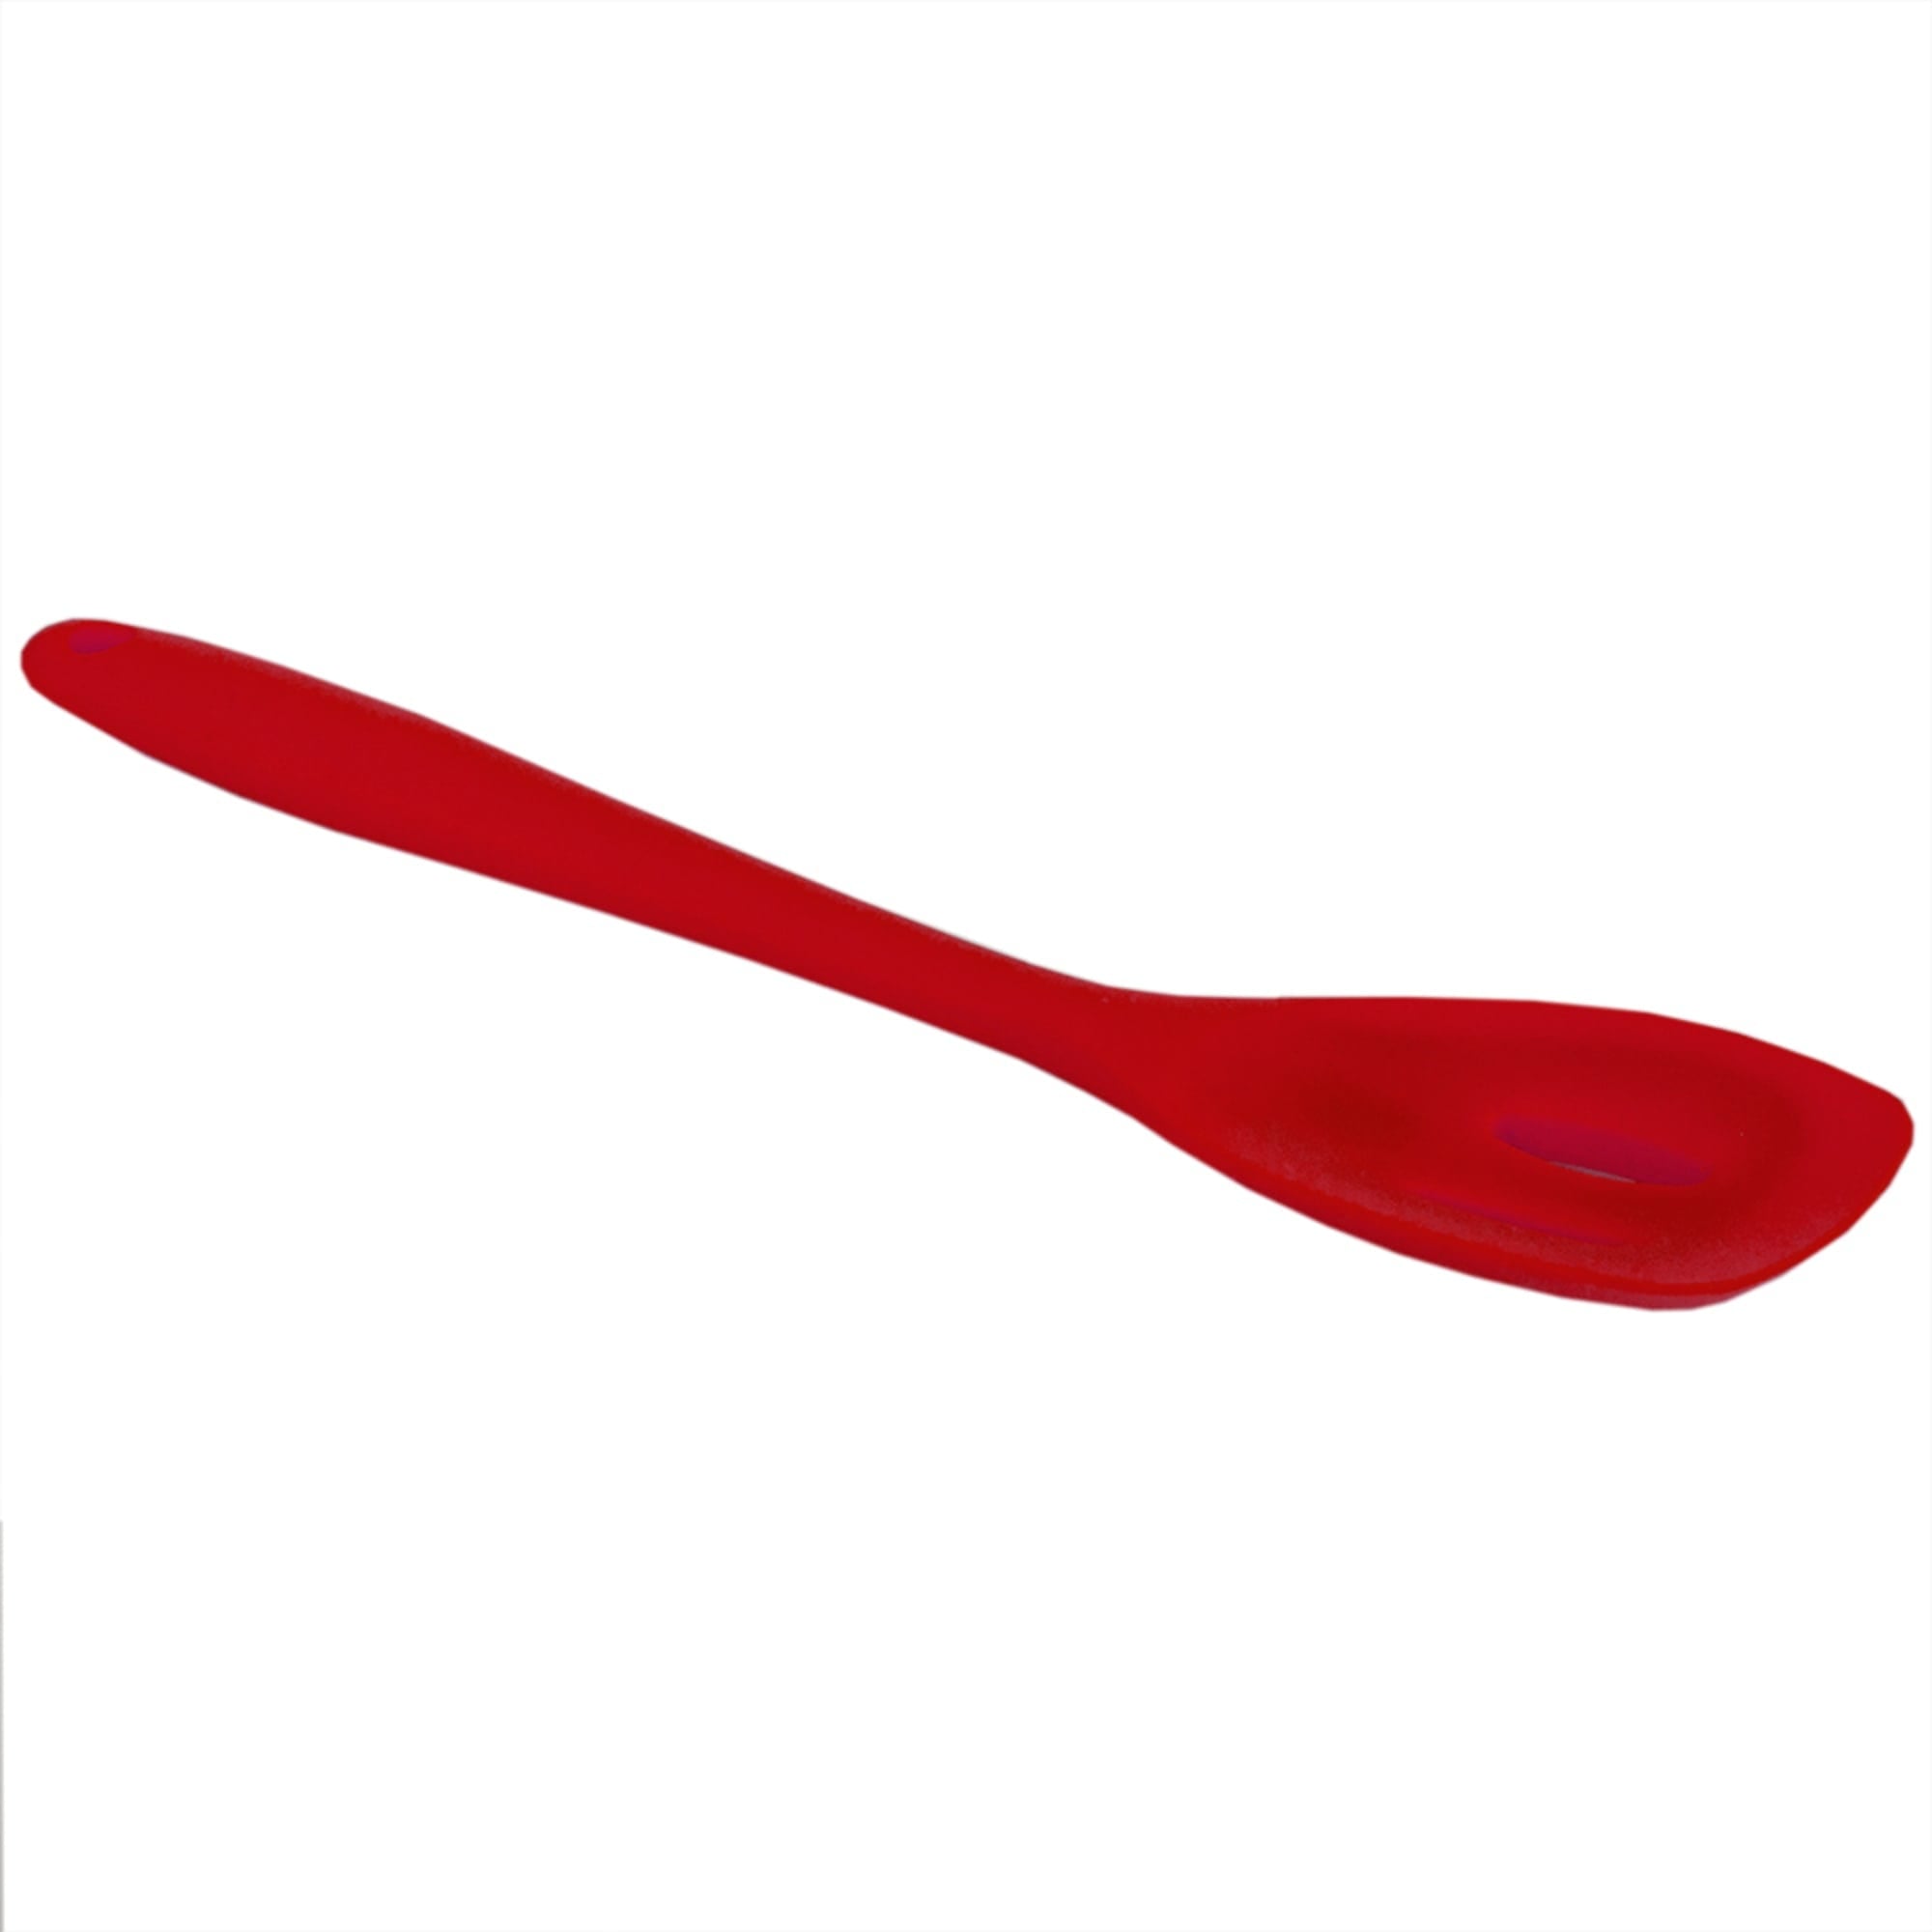 Home Basics Heat-Resistant Silicone Slotted Spoon, Red $3.00 EACH, CASE PACK OF 24